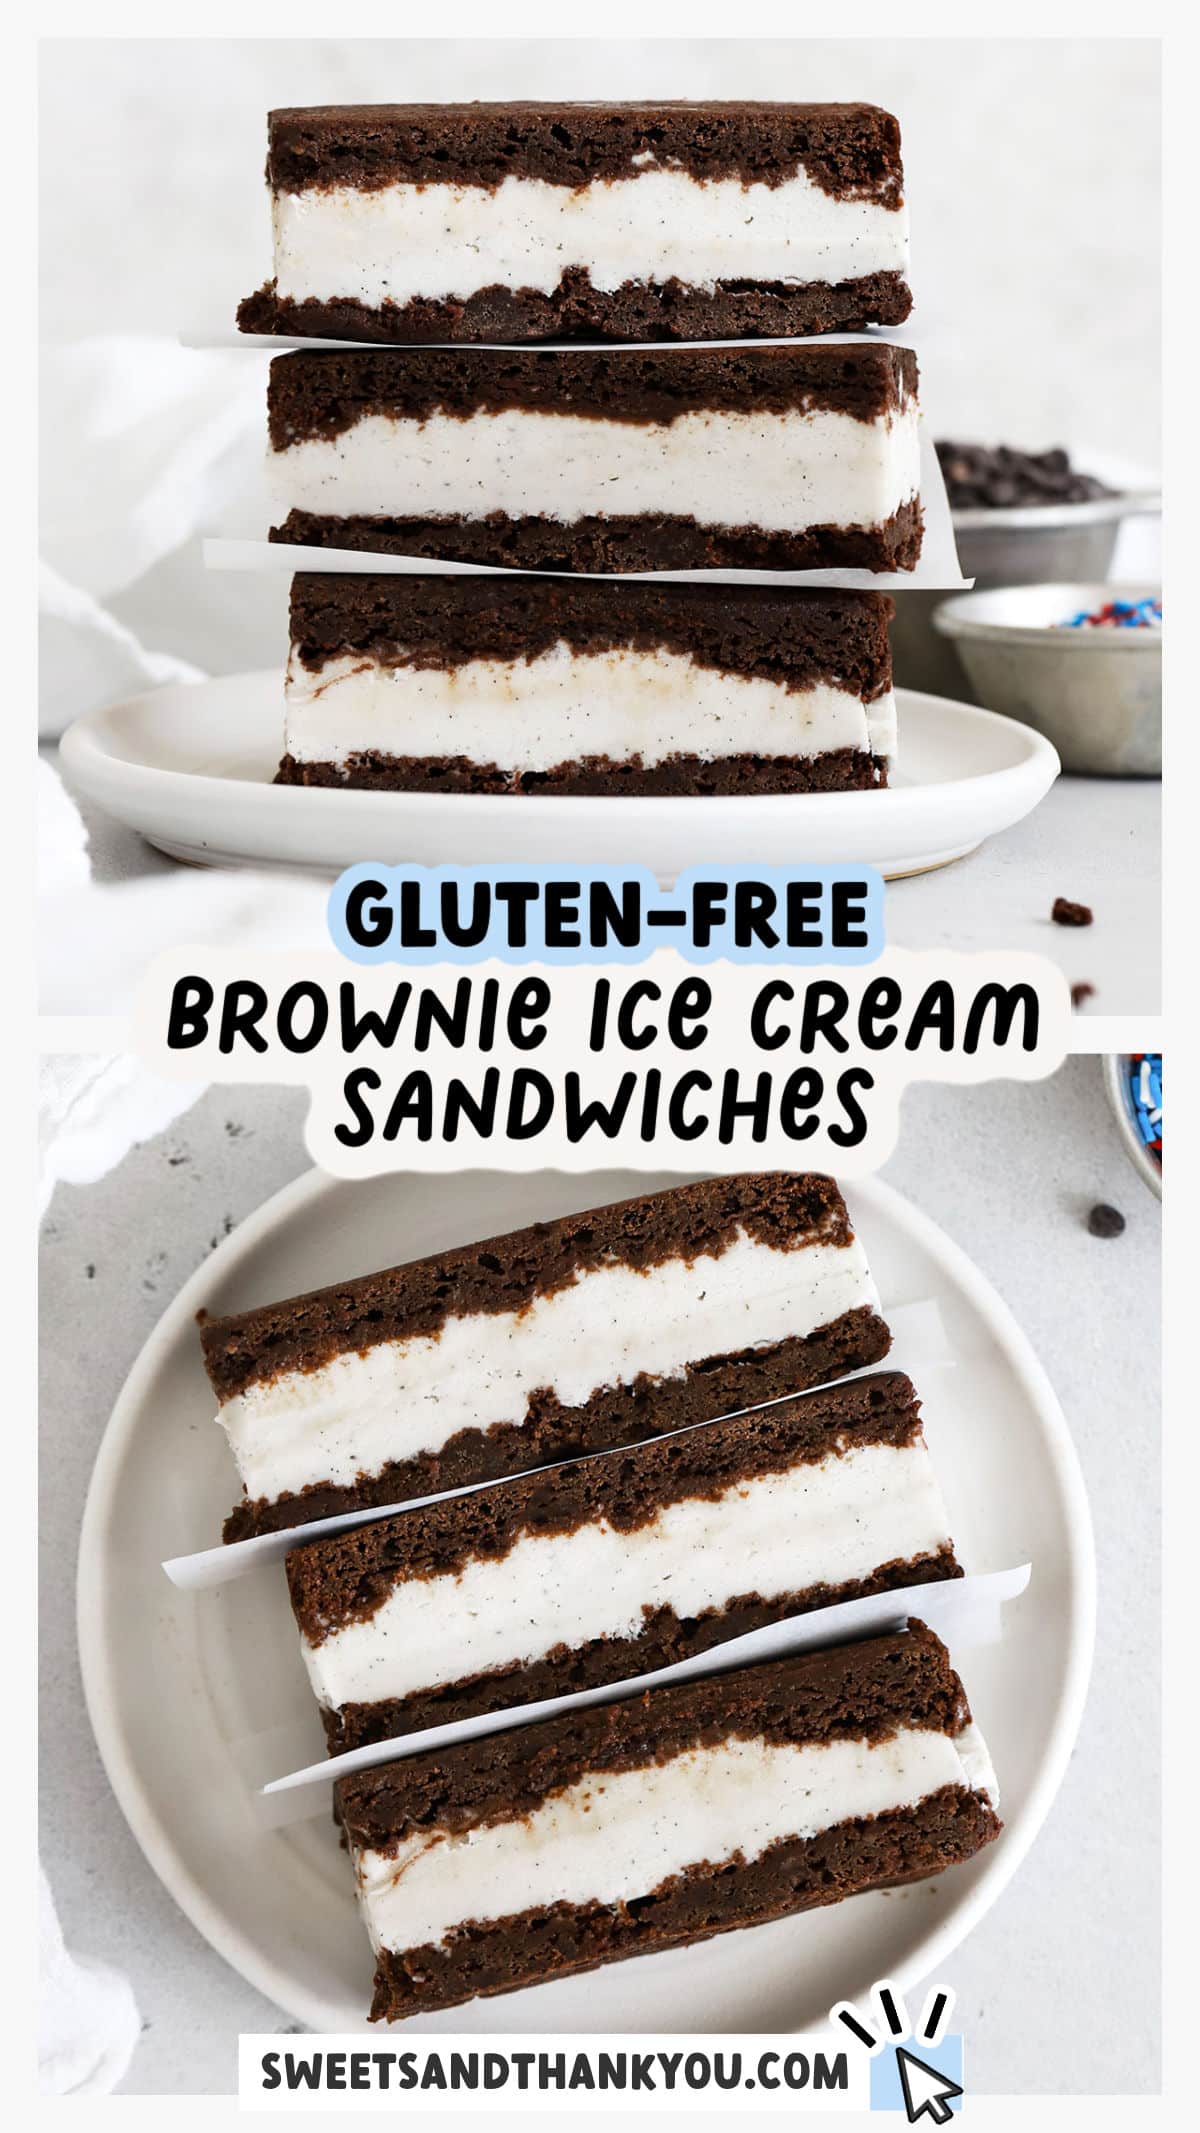 Learn how to make Gluten-Free Brownie Ice Cream Sandwiches! This easy ice cream dessert is the perfect summer treat! These homemade gluten-free ice cream sandwiches start with two thin layers of fudgy brownie paired with creamy vanilla ice cream. They have all the classic flavor you love, simply made gluten-free. Get our gluten-free ice cream sandwich recipe, cute ways to decorate, yummy flavor combinations to try and more at sweetsandthankyou.com